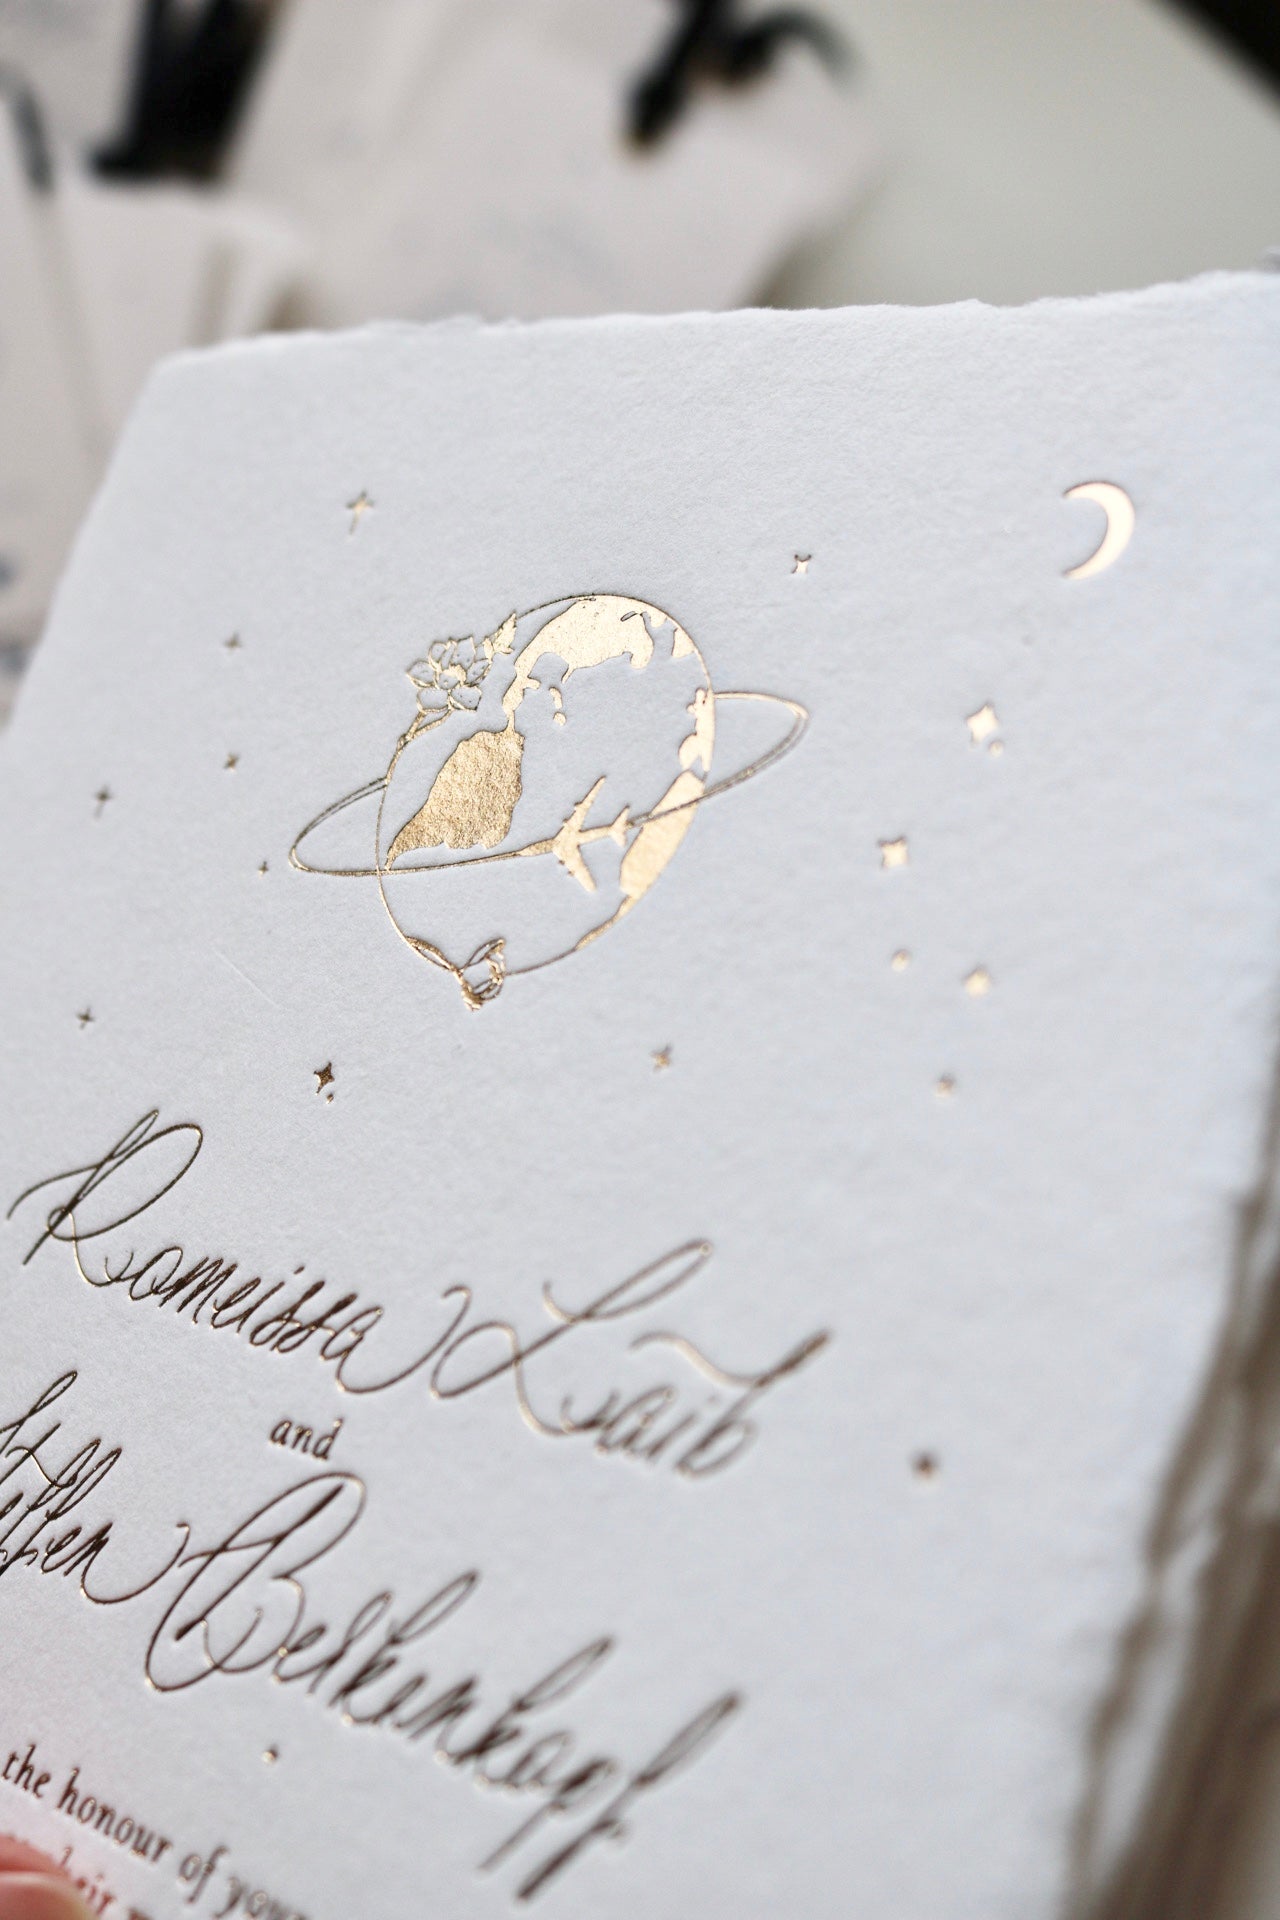 Add elegance and sophistication to your wedding invitations with hot foil printing on handmade paper. Discover expert tips and inspiring designs!